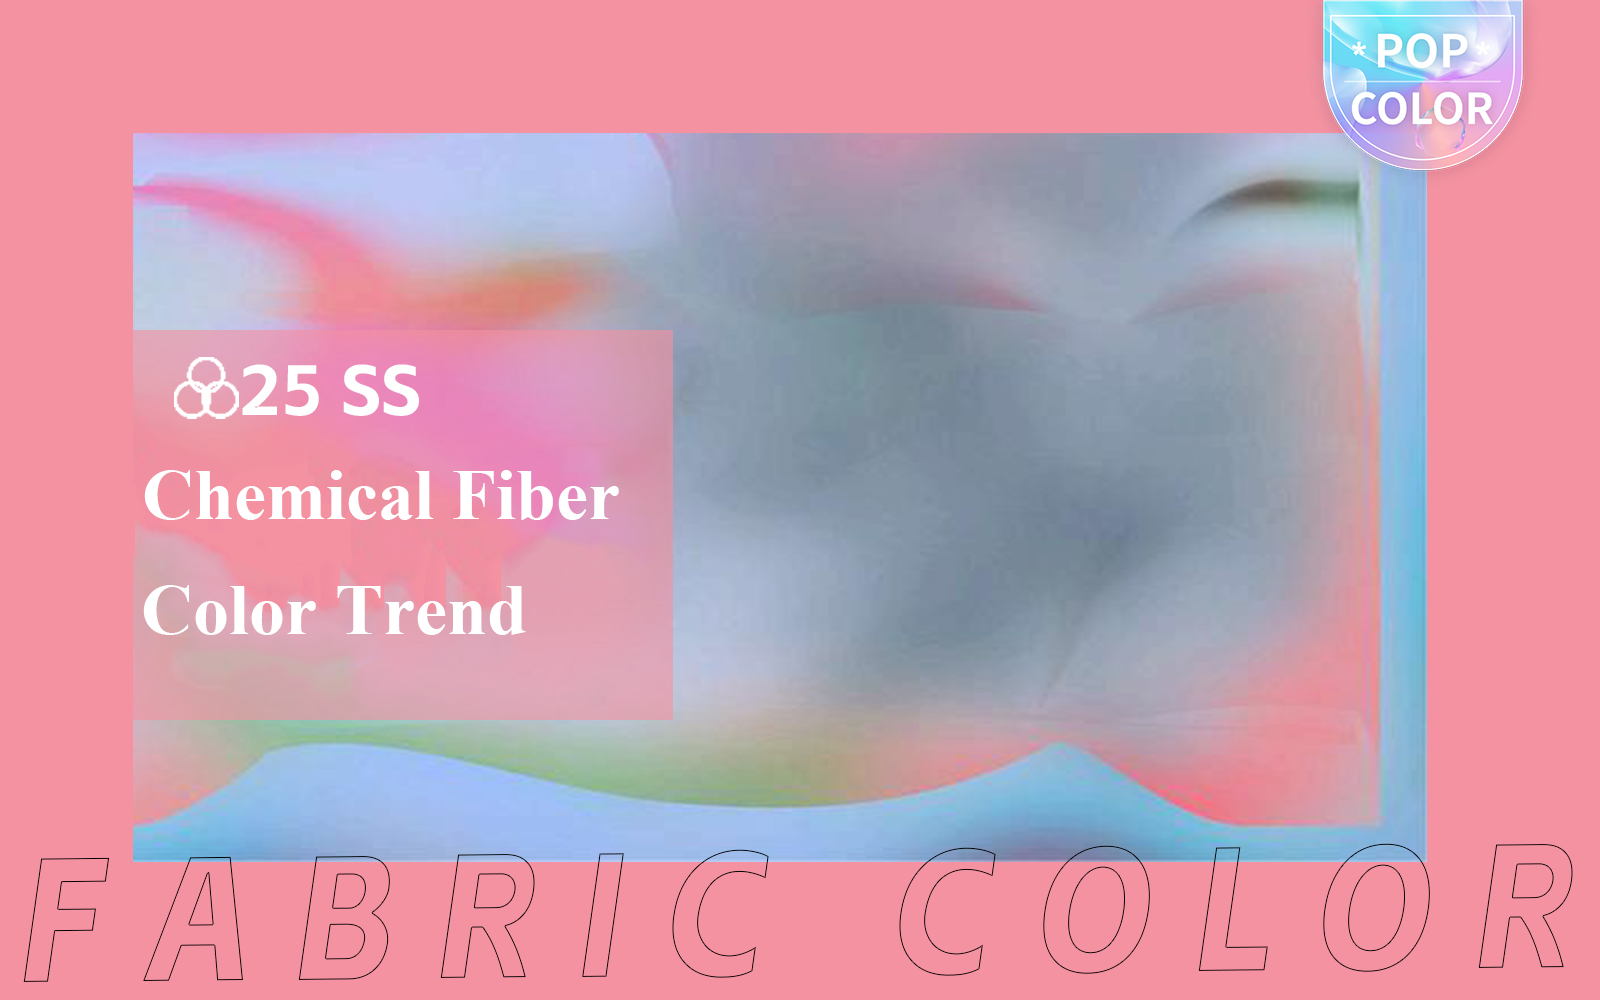 The Color Trend for Chemical Fiber Womenswear